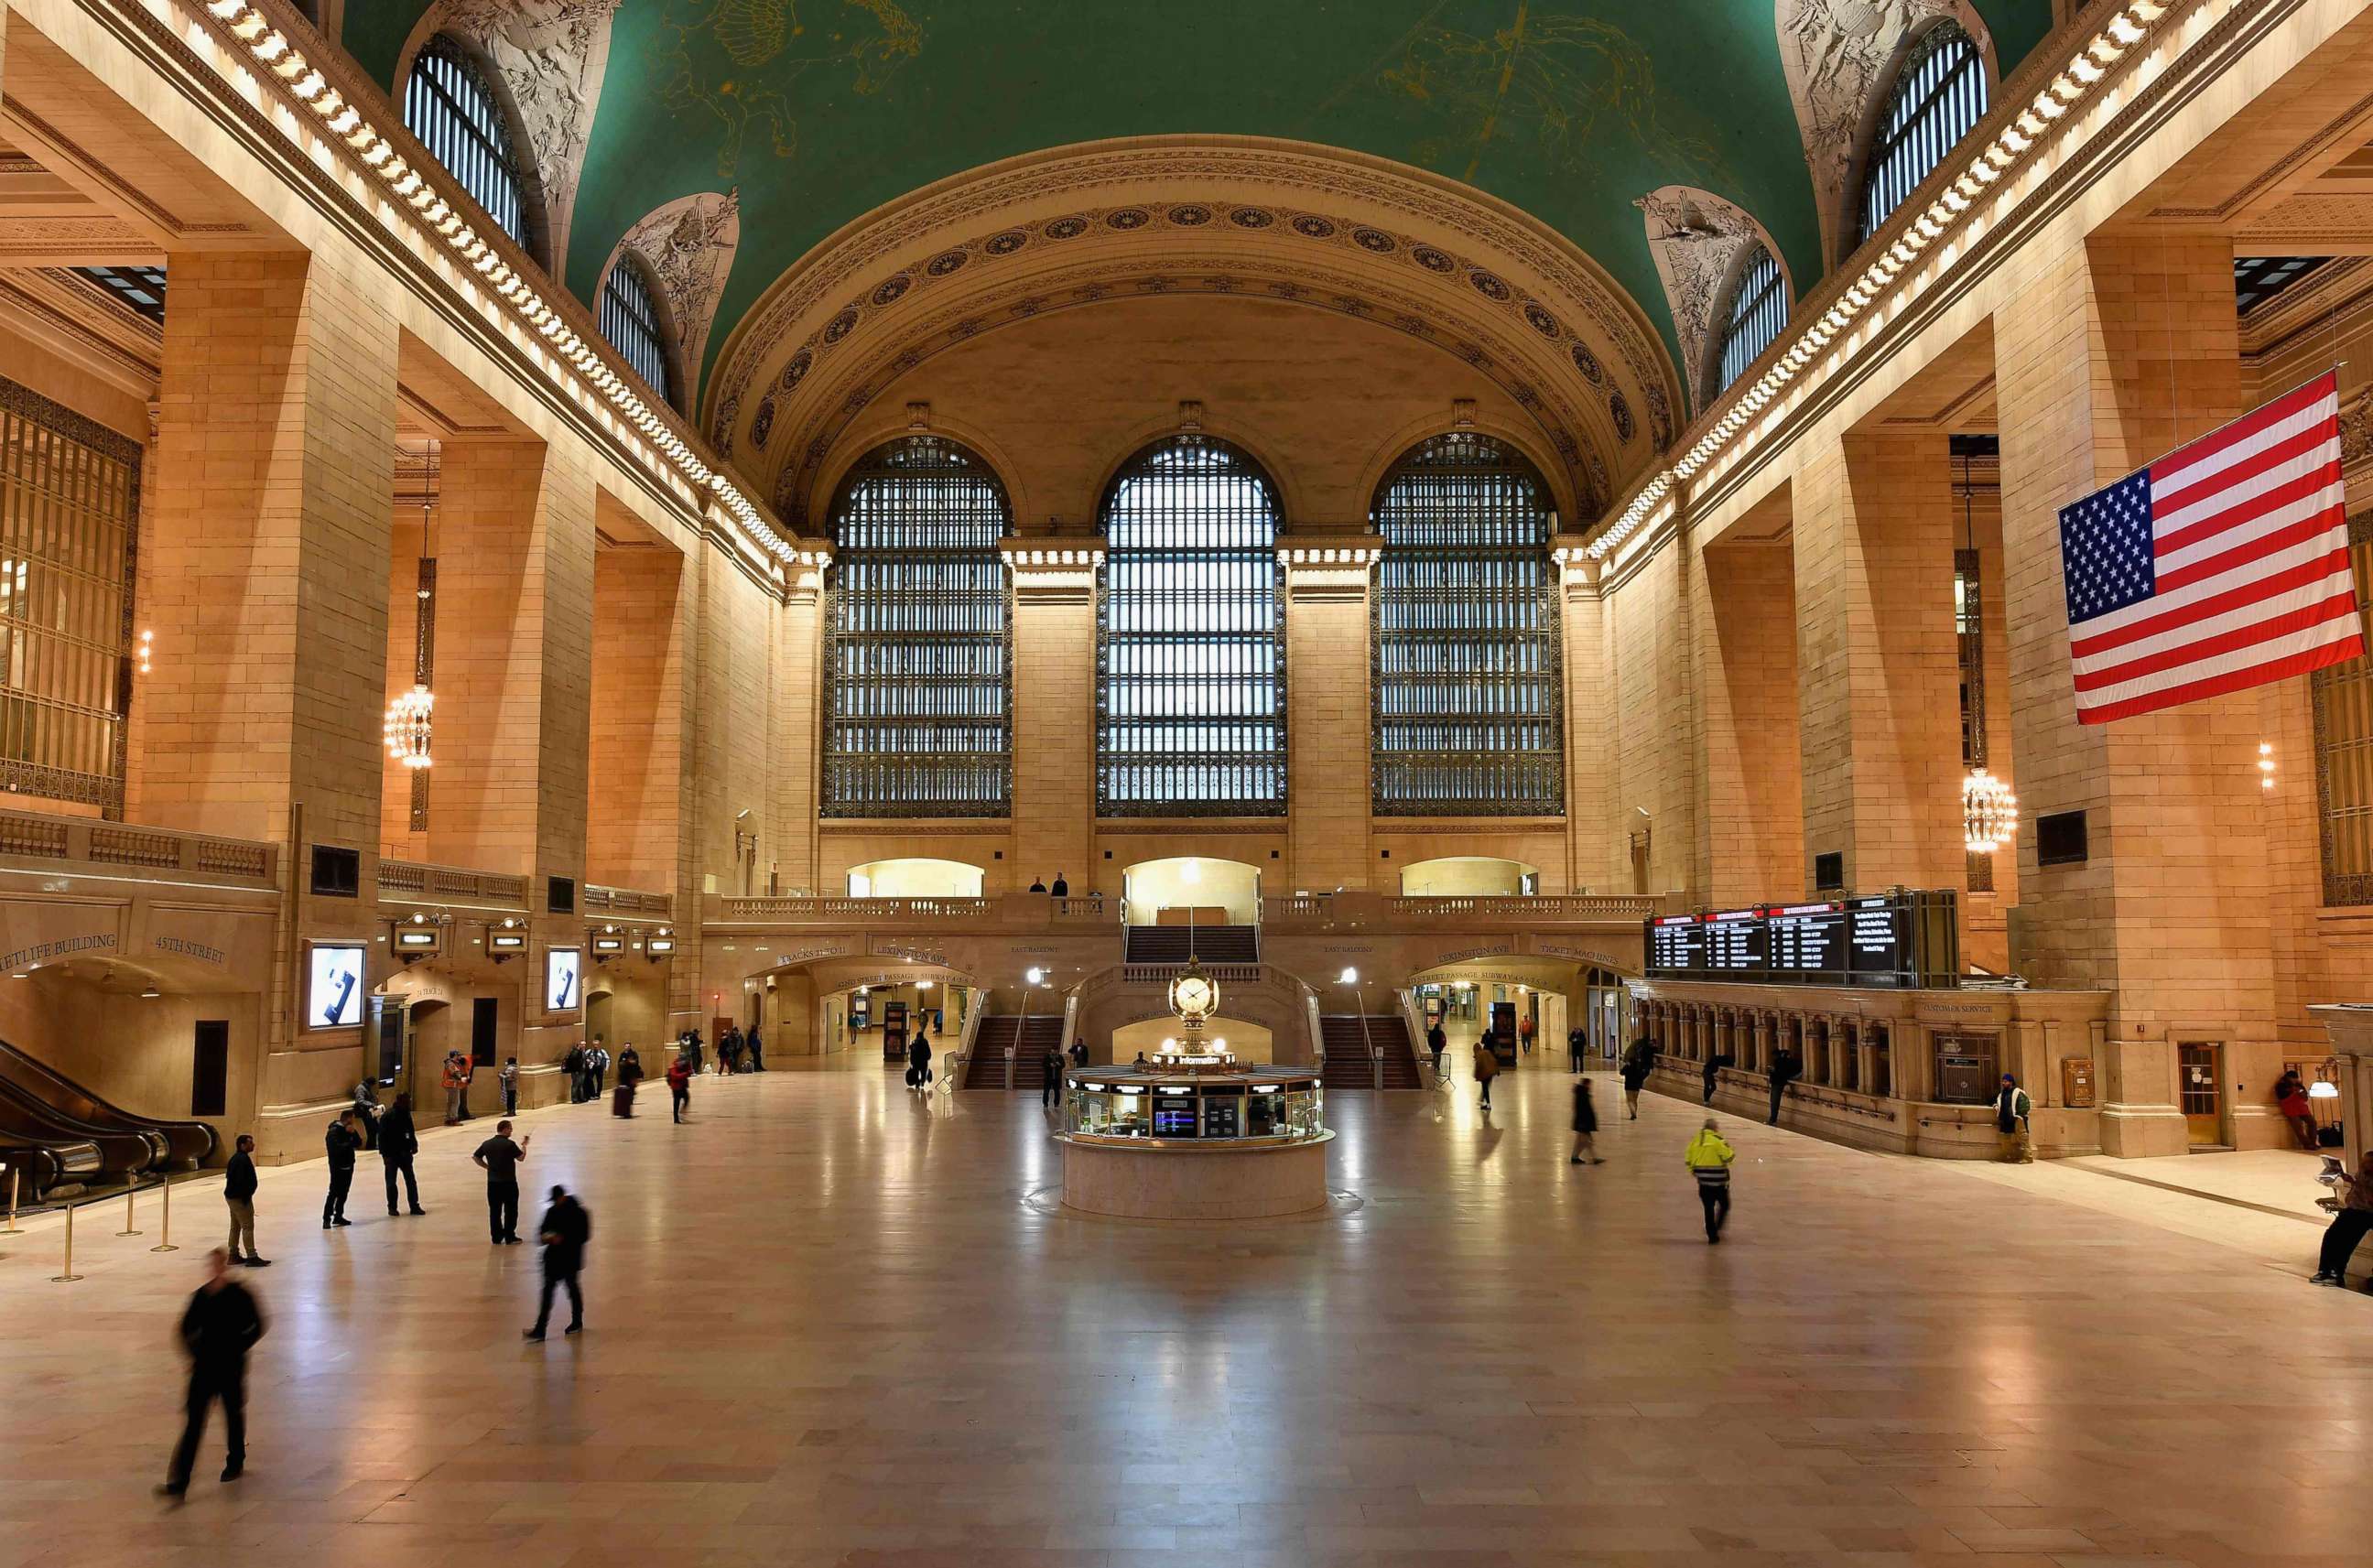 PHOTO: The usually busy Grand Central Station is seen nearly empty on March 25, 2020 in New York City.